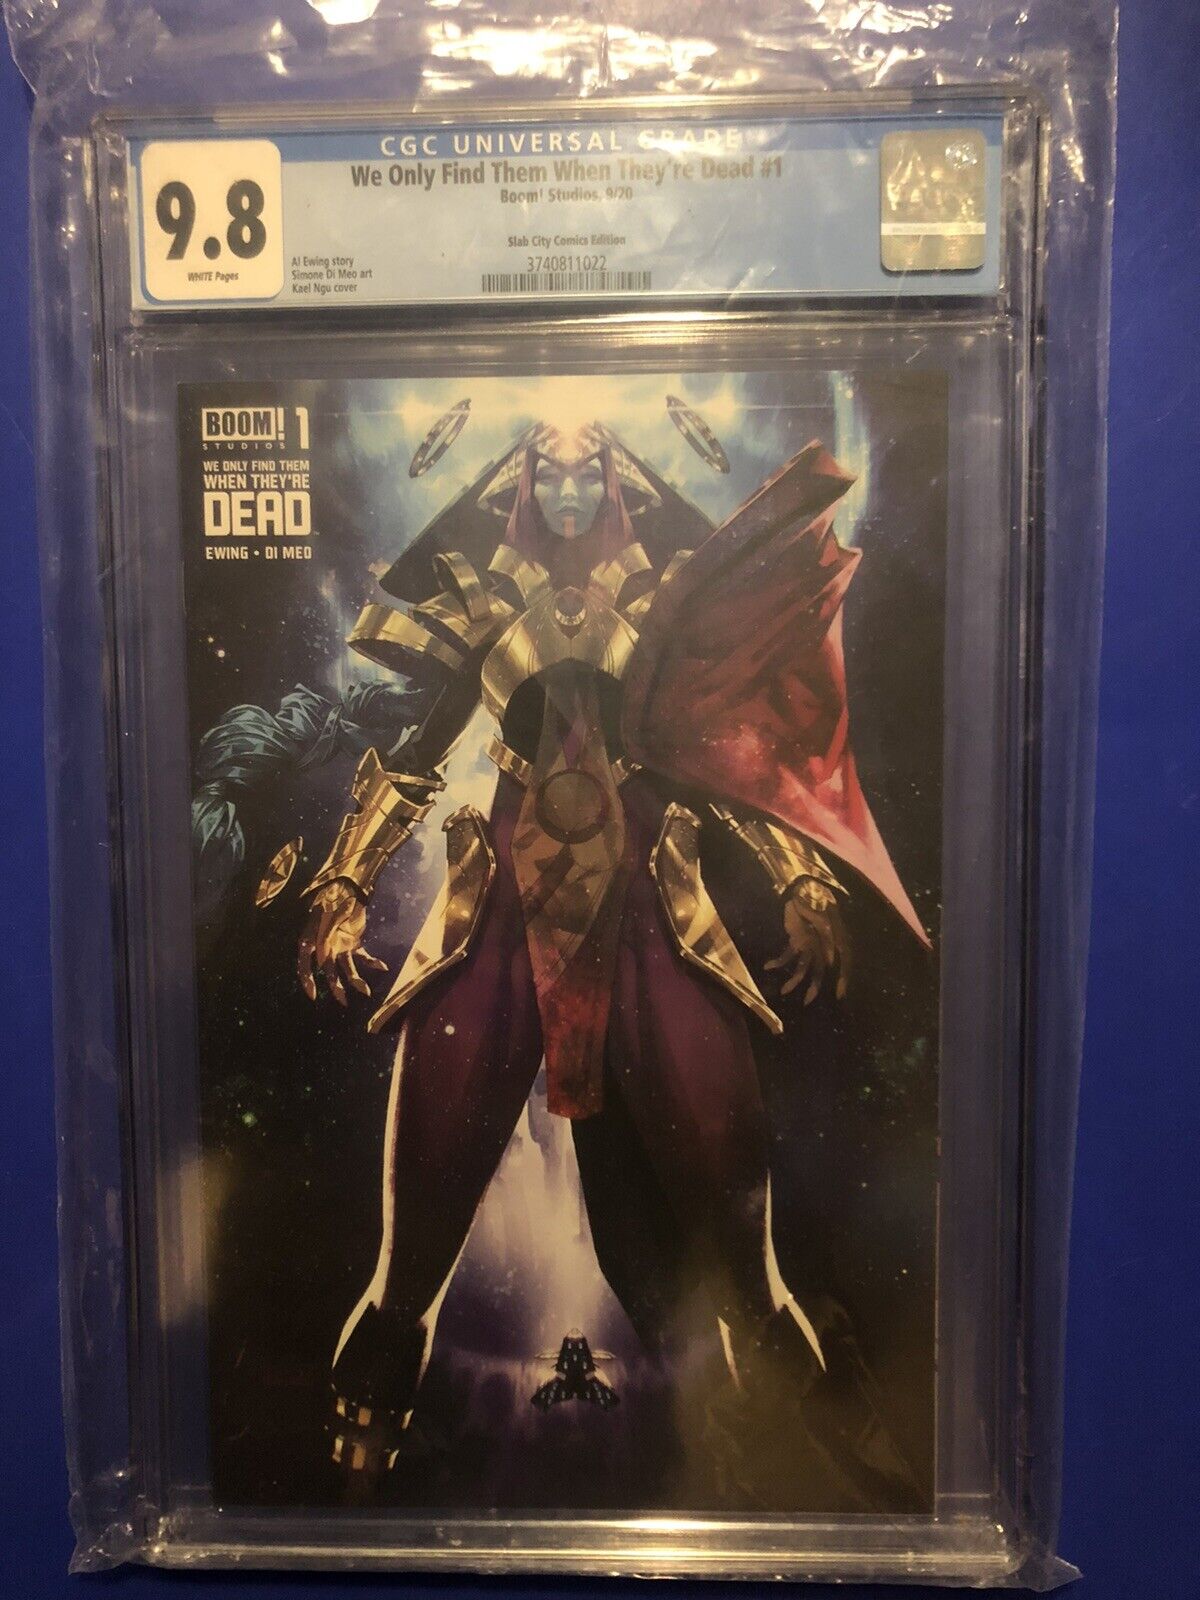 We Only Find Them When They're Dead #1 CGC 9.8 Ngu UK Variant LTD 1000 1st Print